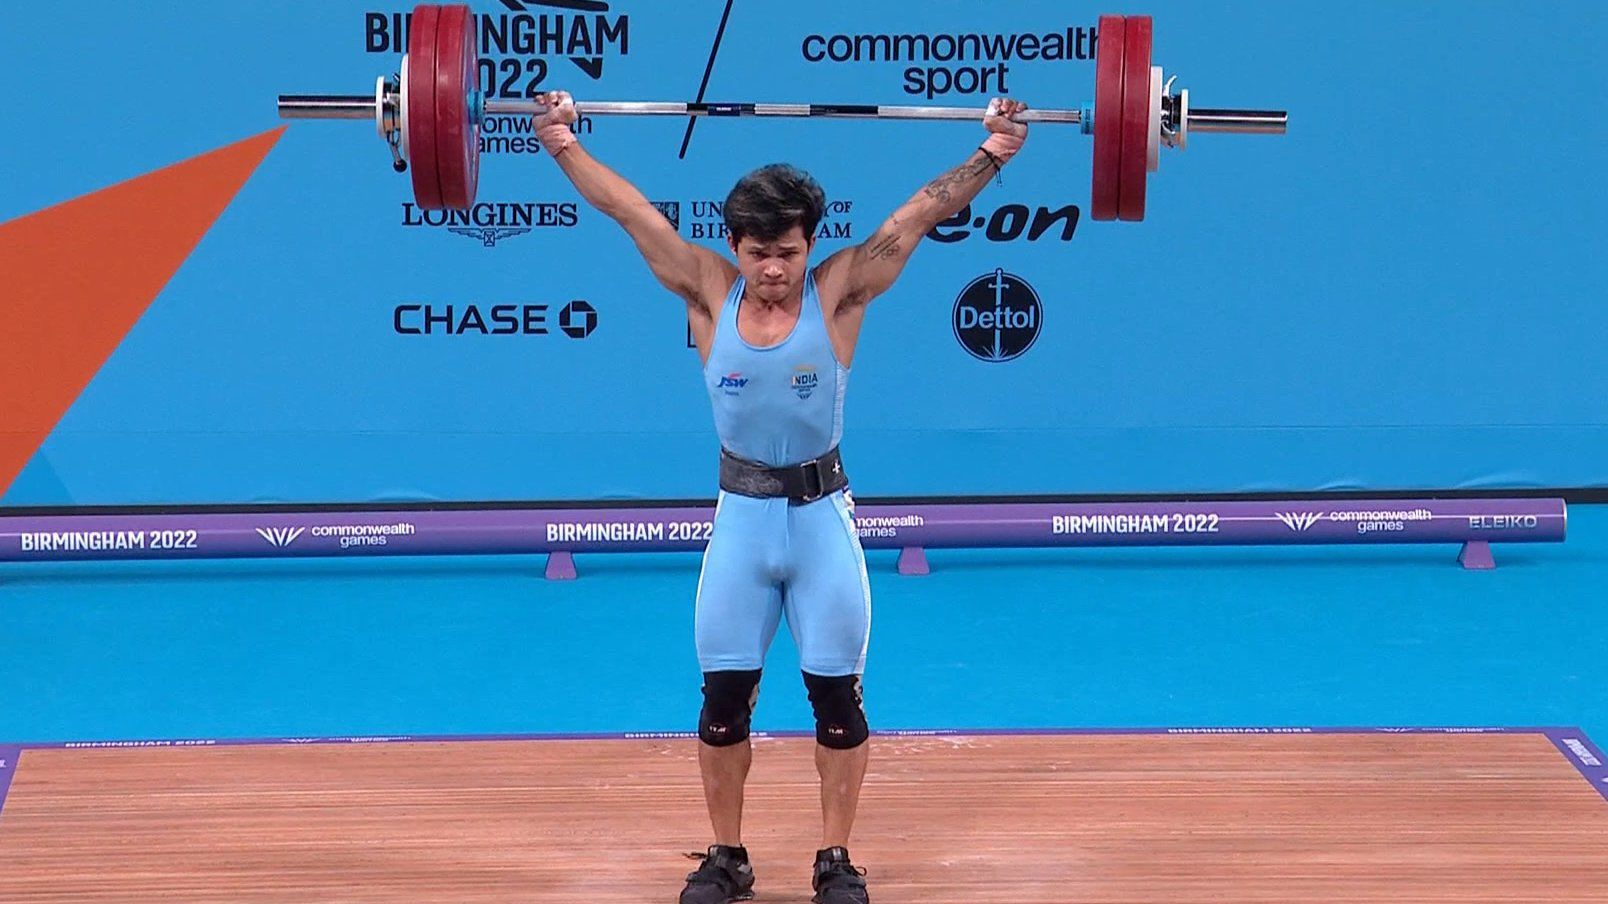 Watch: Jeremy Lalrinnunga’s gold-winning lift at Commonwealth Games 2022